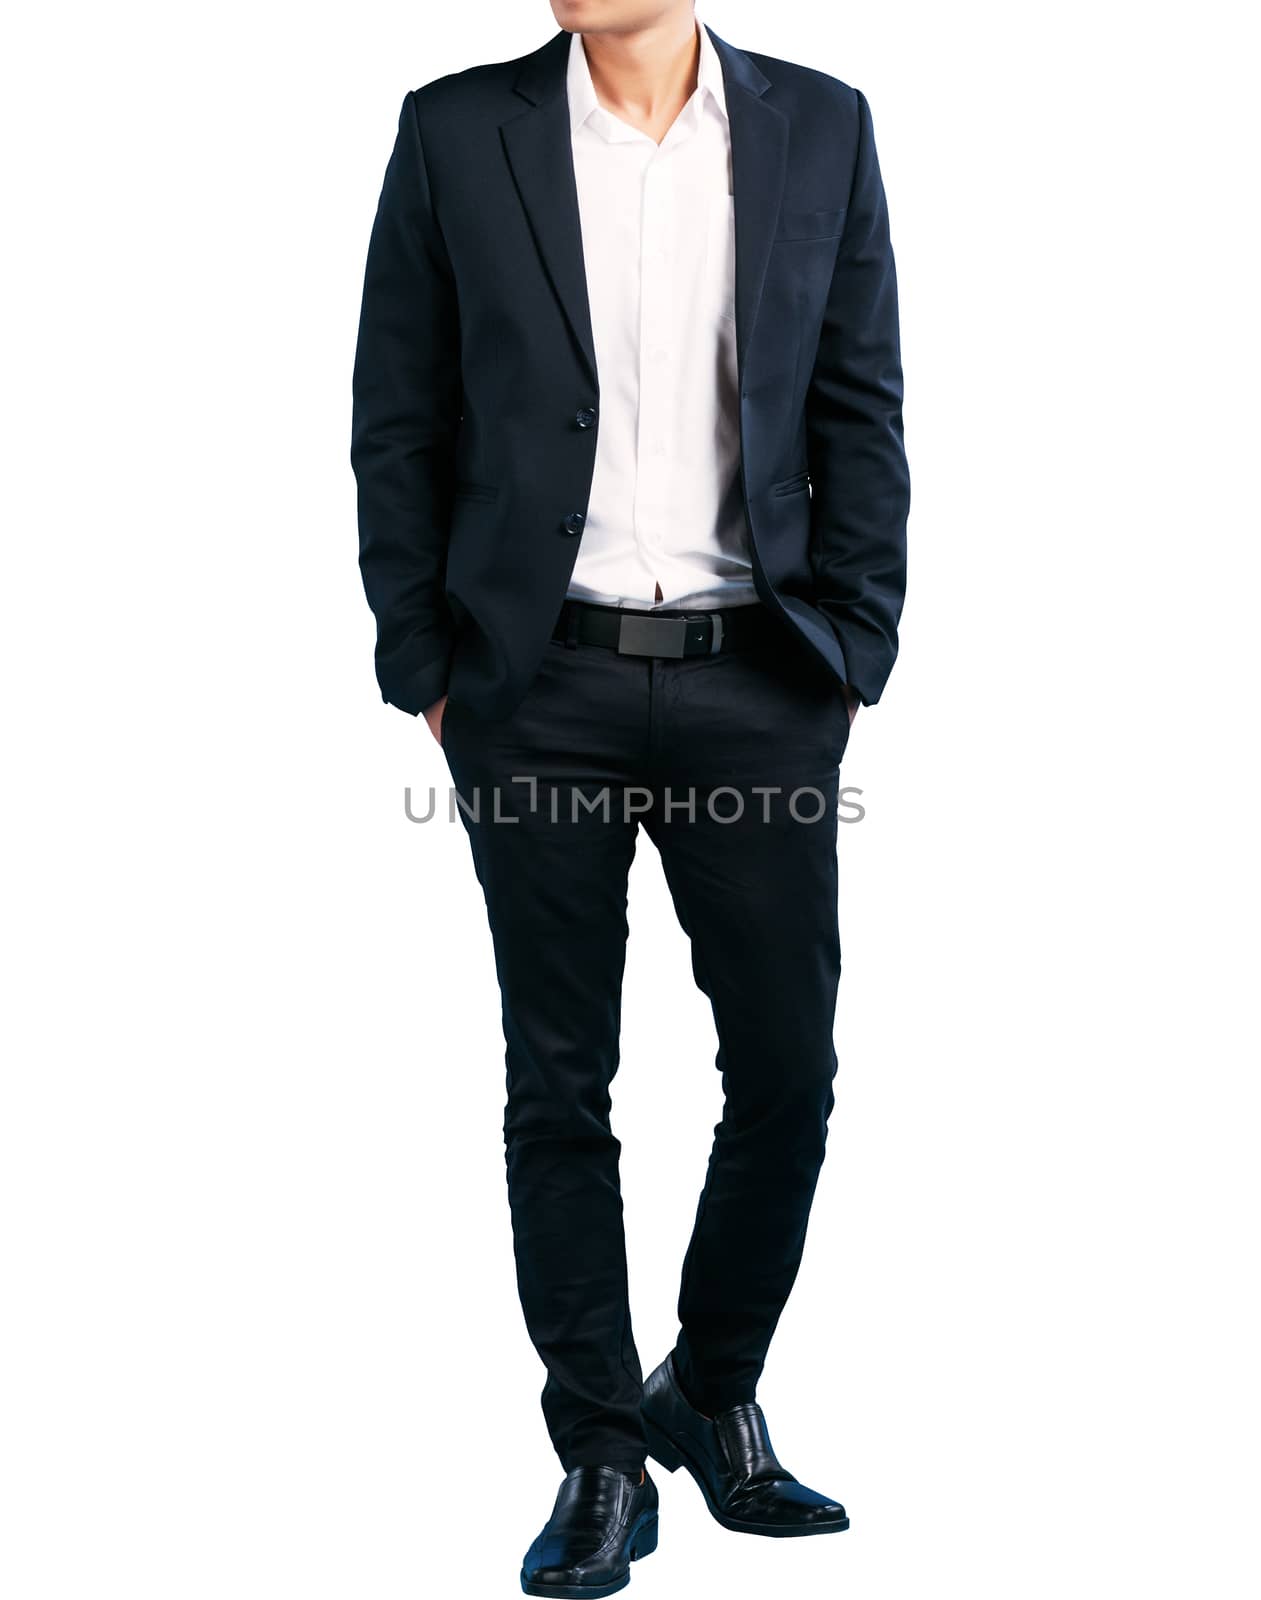 A lot of businessmen in suits Smart handsome isolate on white background clipping path